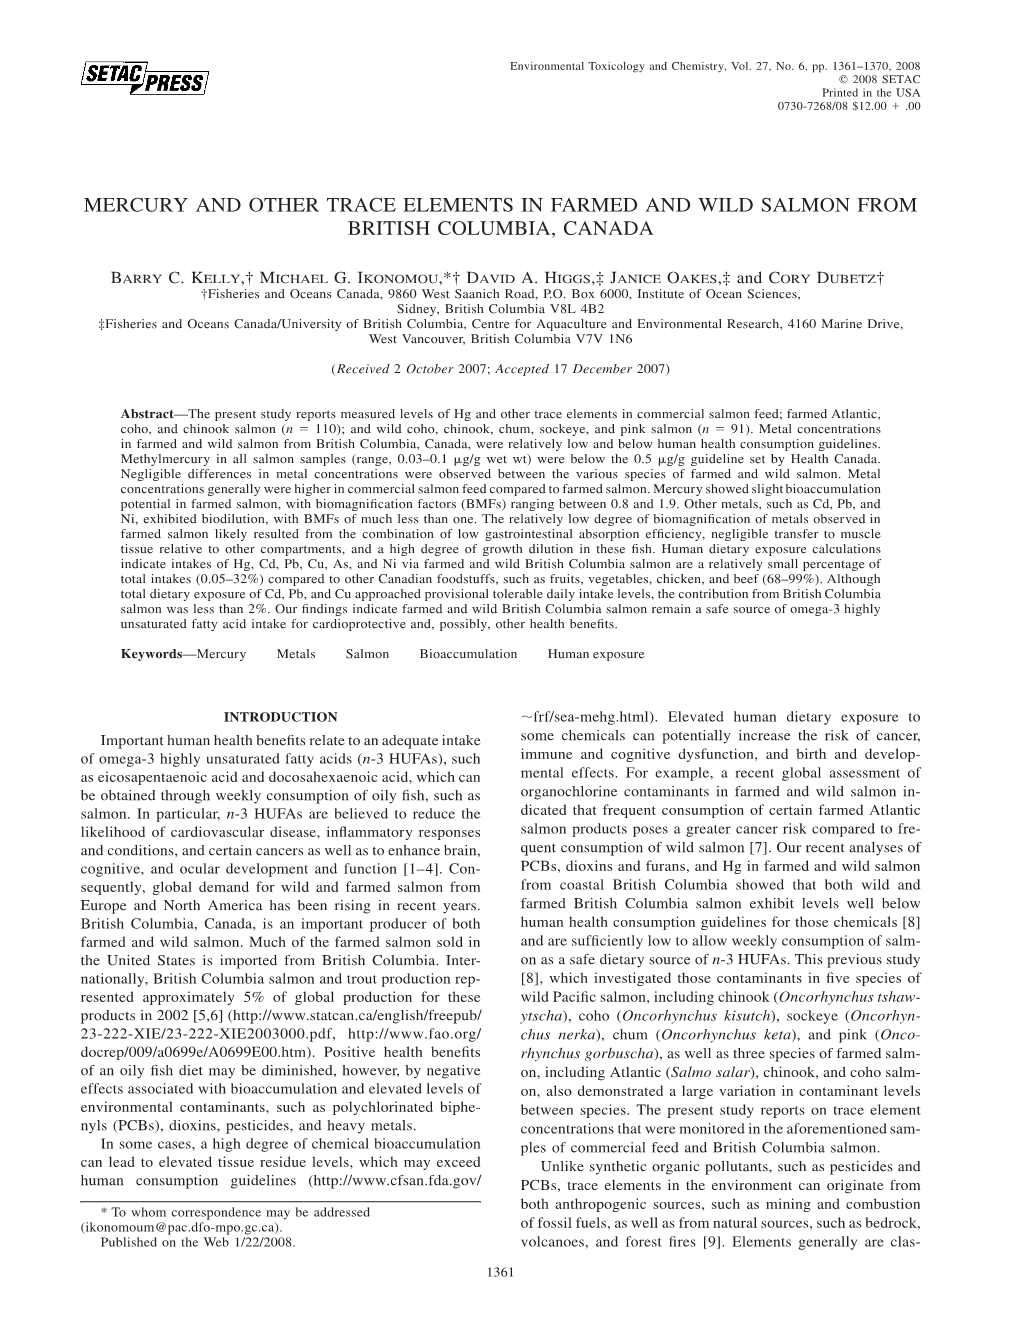 Mercury and Other Trace Elements in Farmed and Wild Salmon from British Columbia, Canada